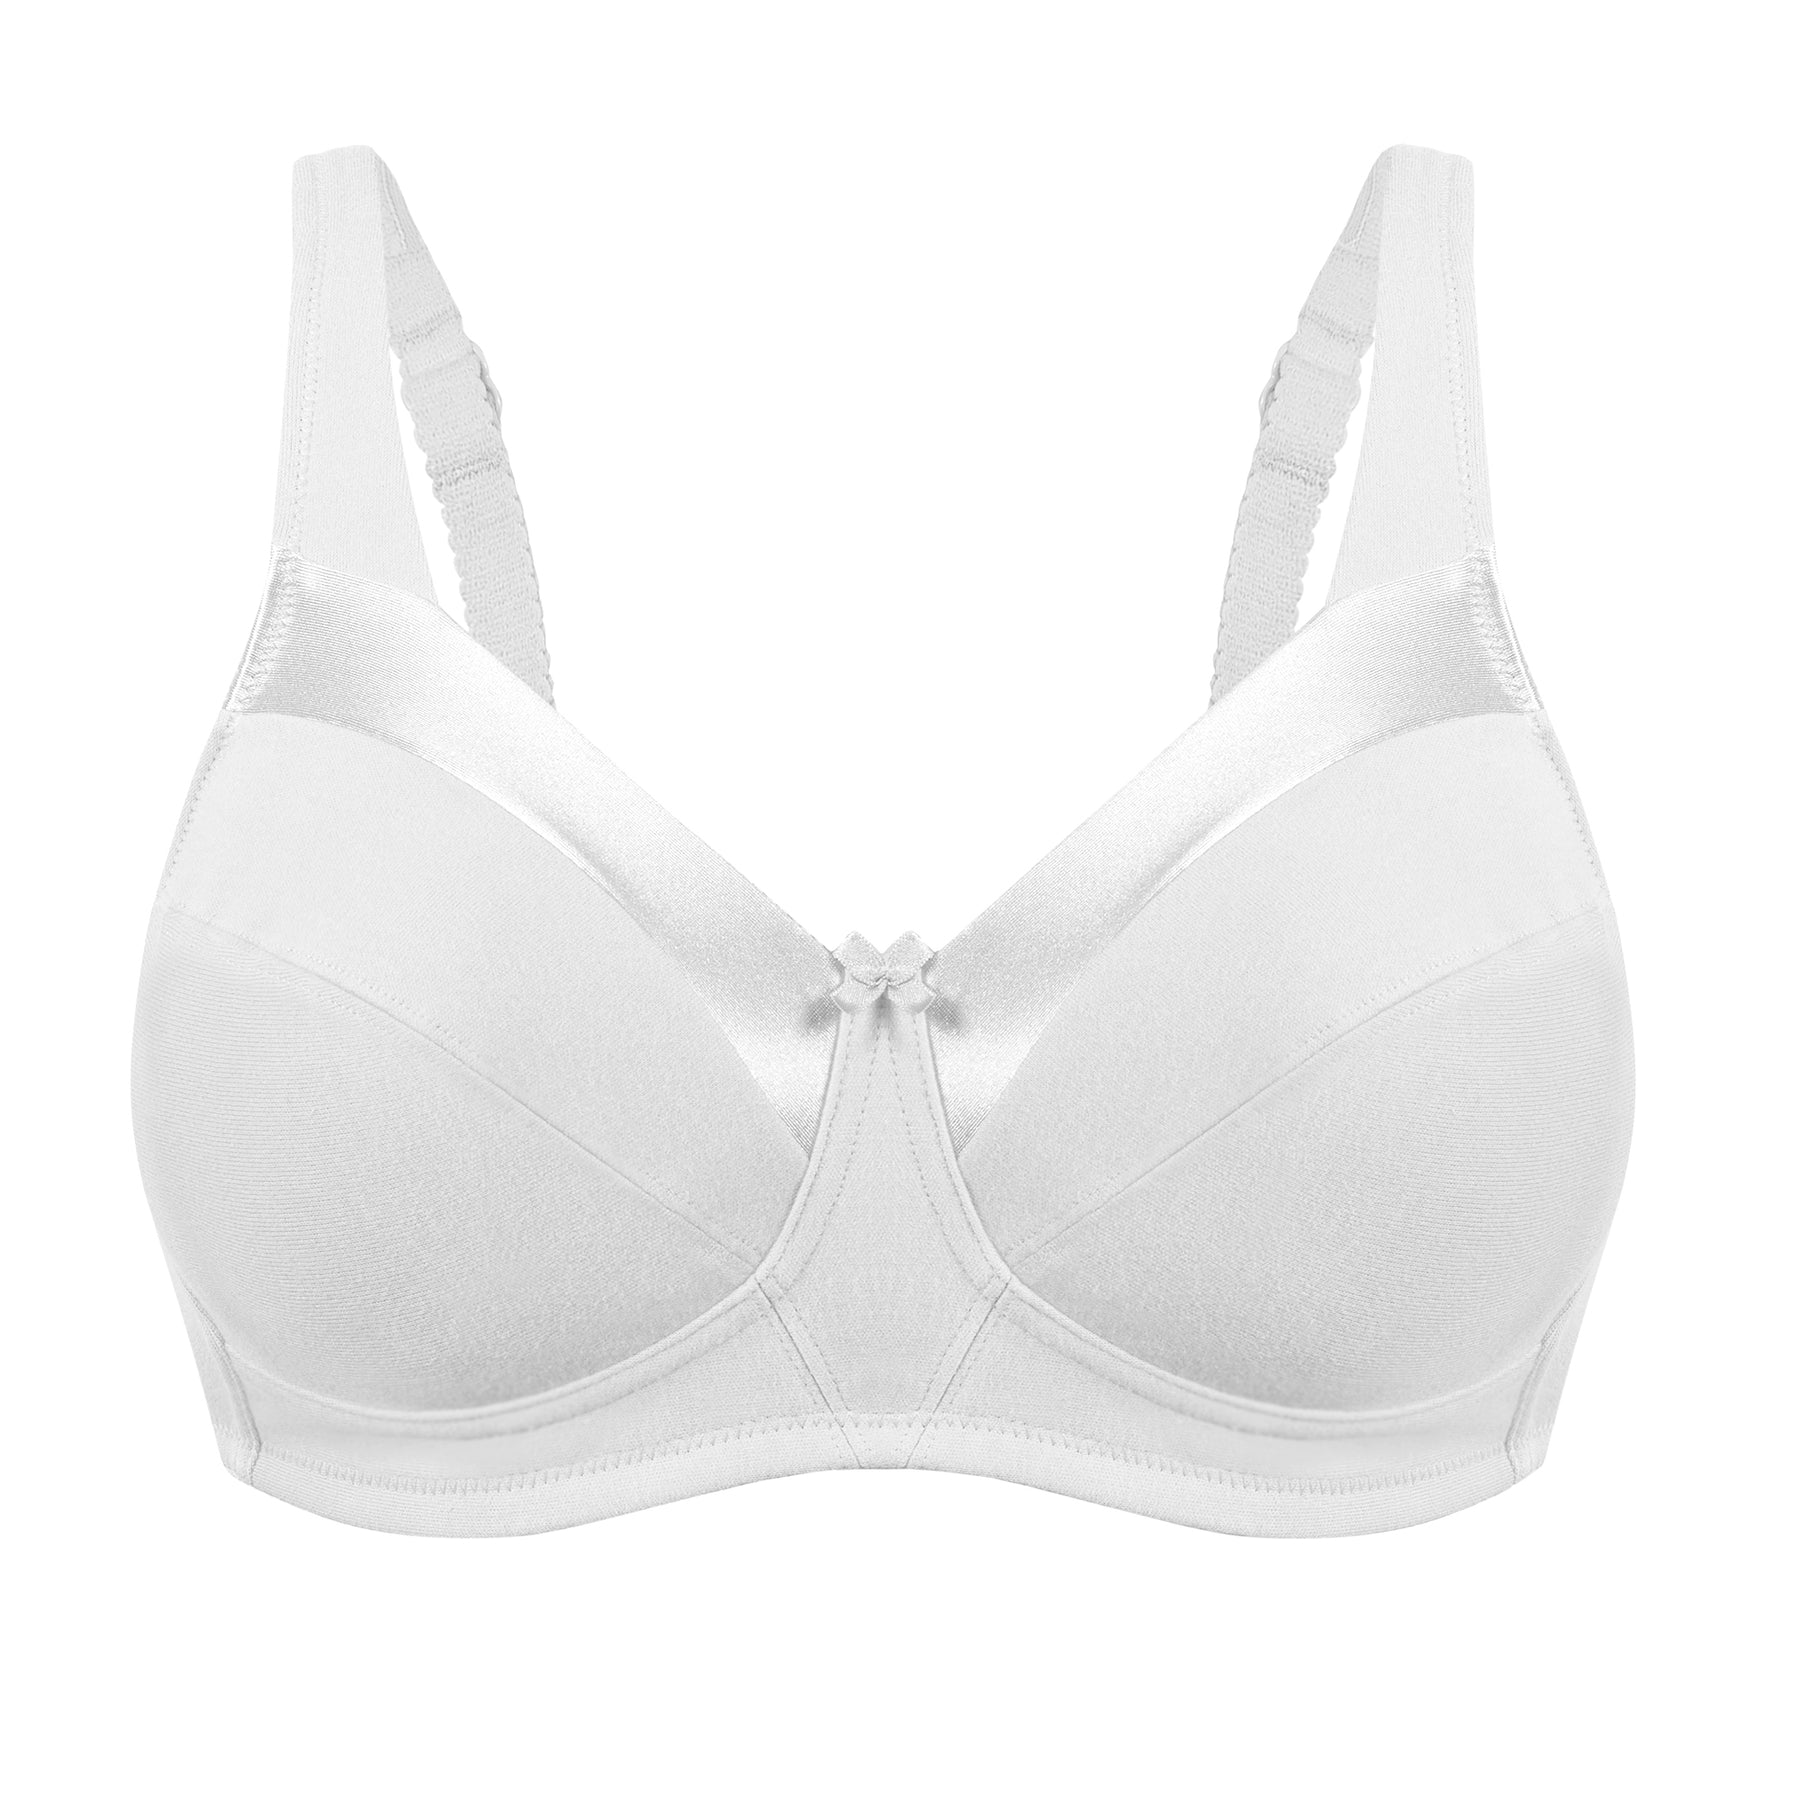 Buy Global Business 100% Cotton Non-Padded White Bra-Round Stiched with  Nylon Belt/Strap. Colour:White/Cup Size:B(Pack of 3 Pieces) at